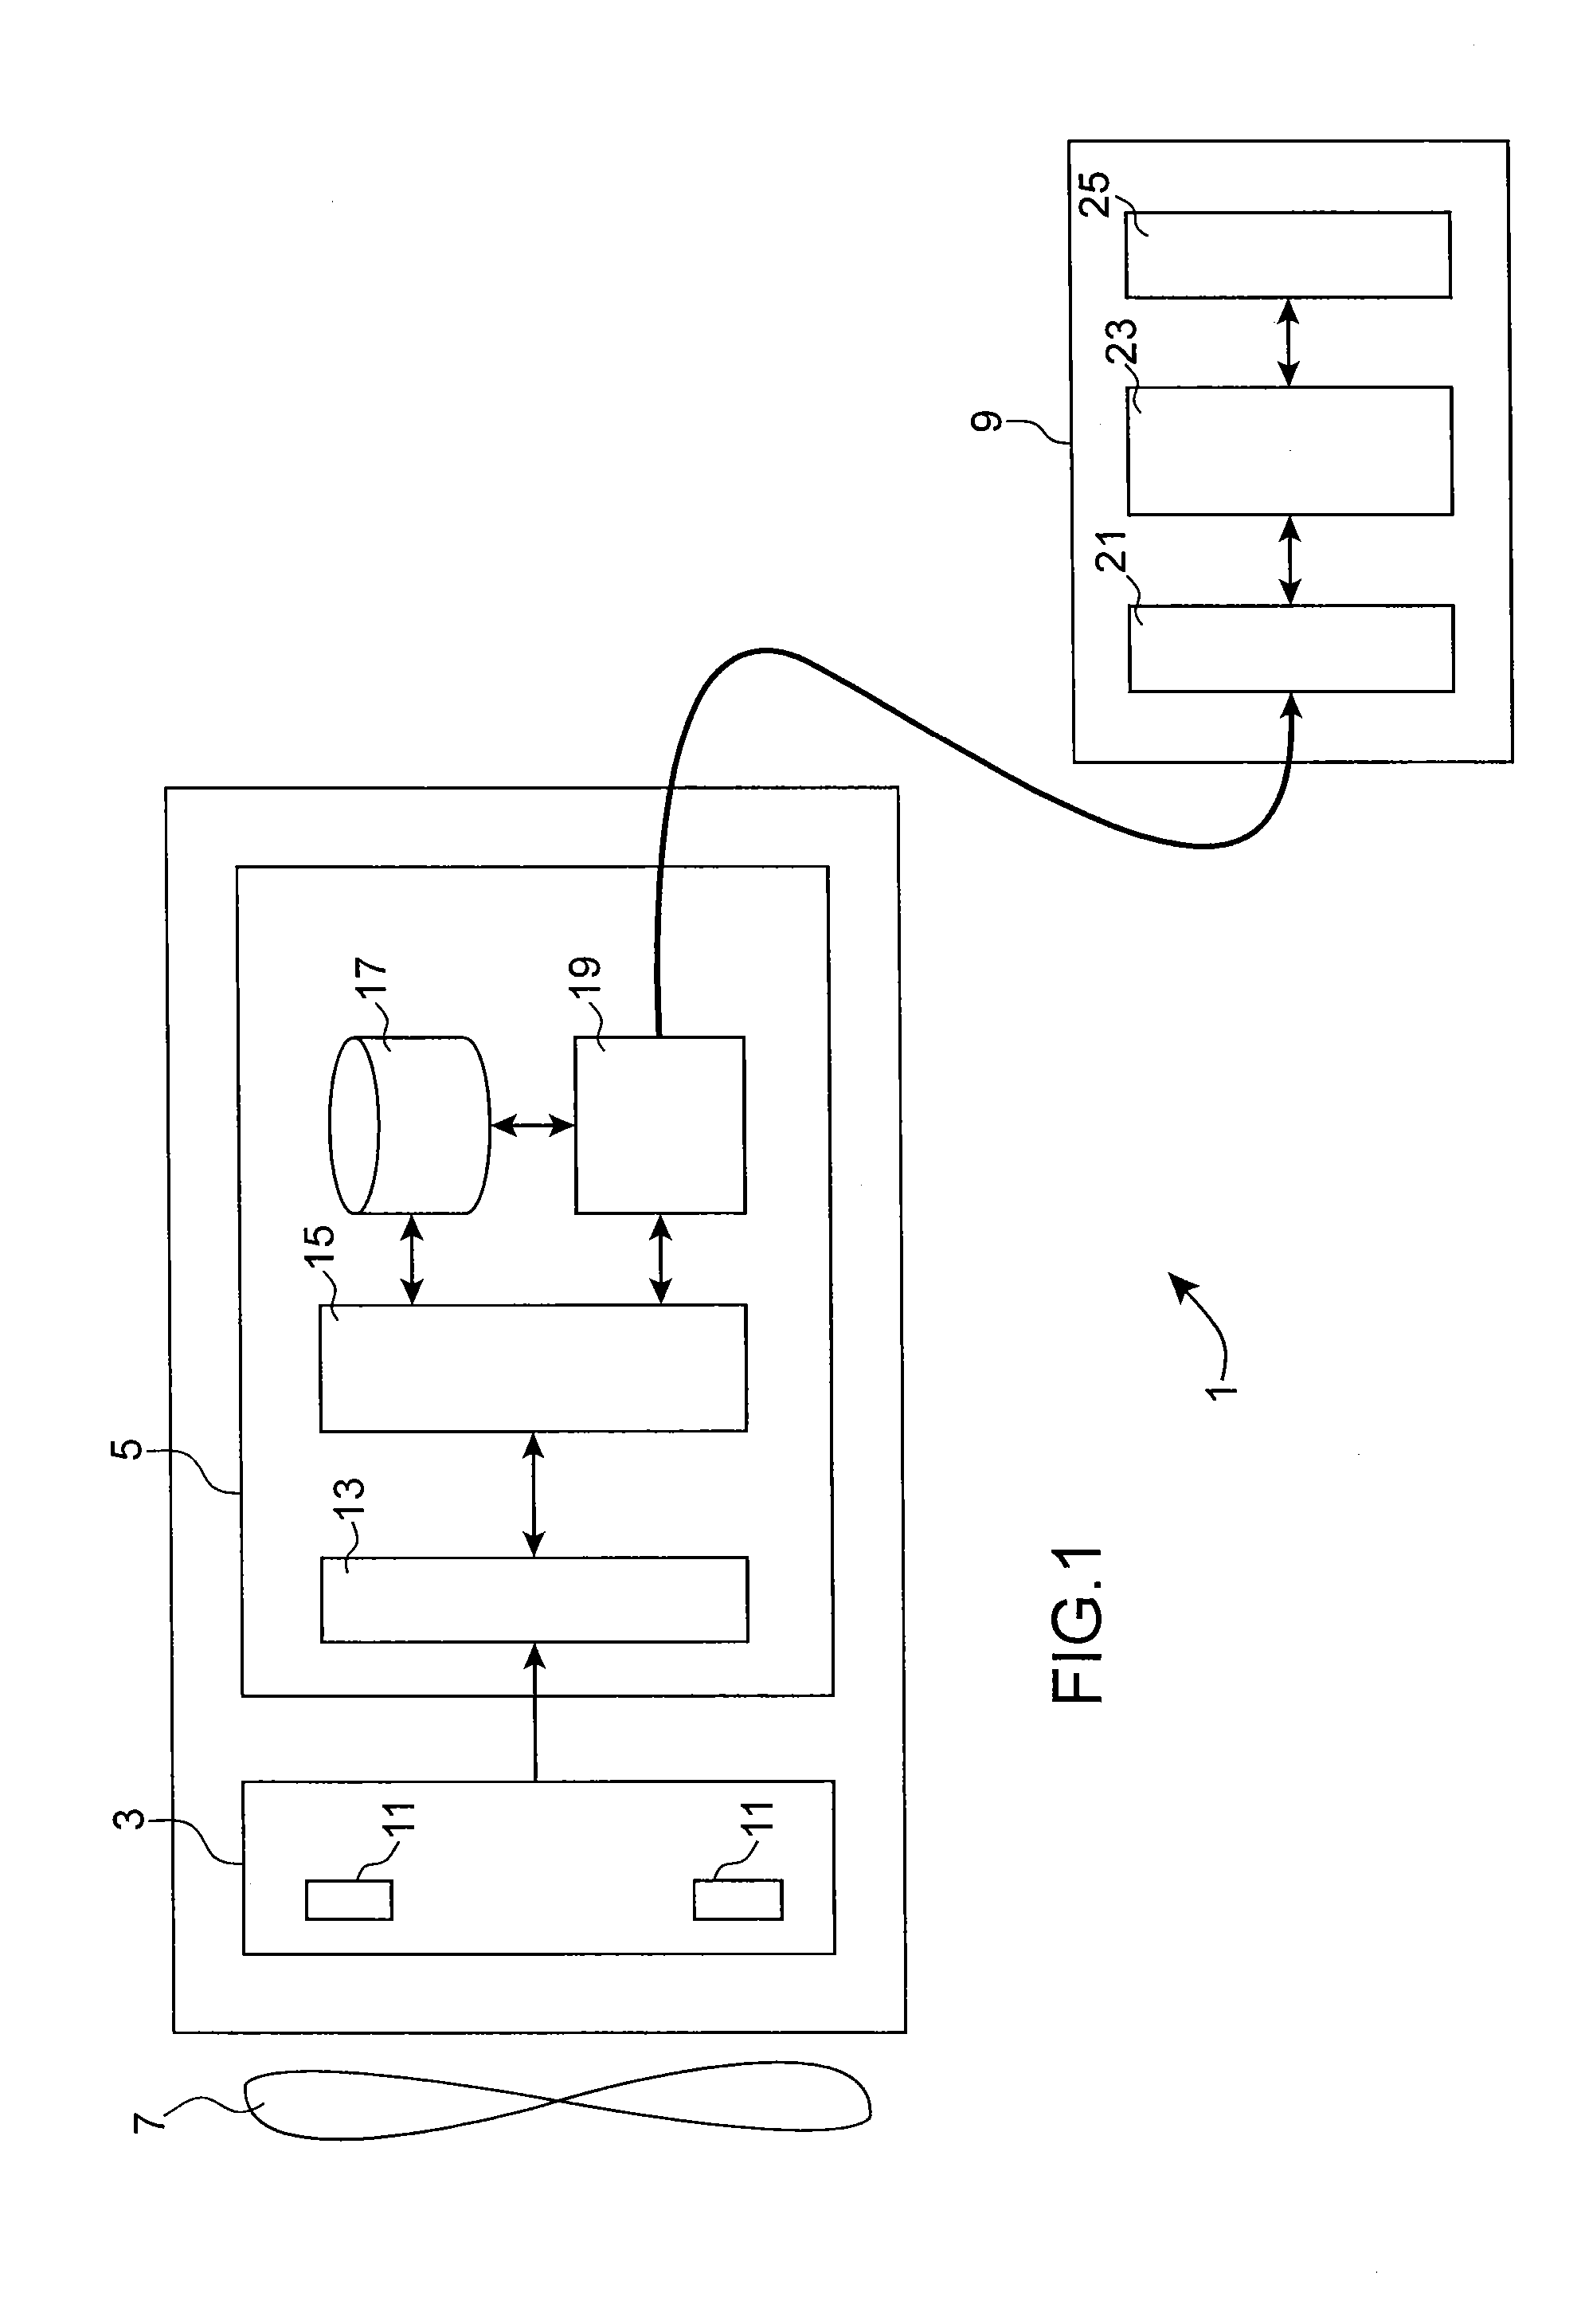 System for detecting defects on an aircraft engine impeller wheel